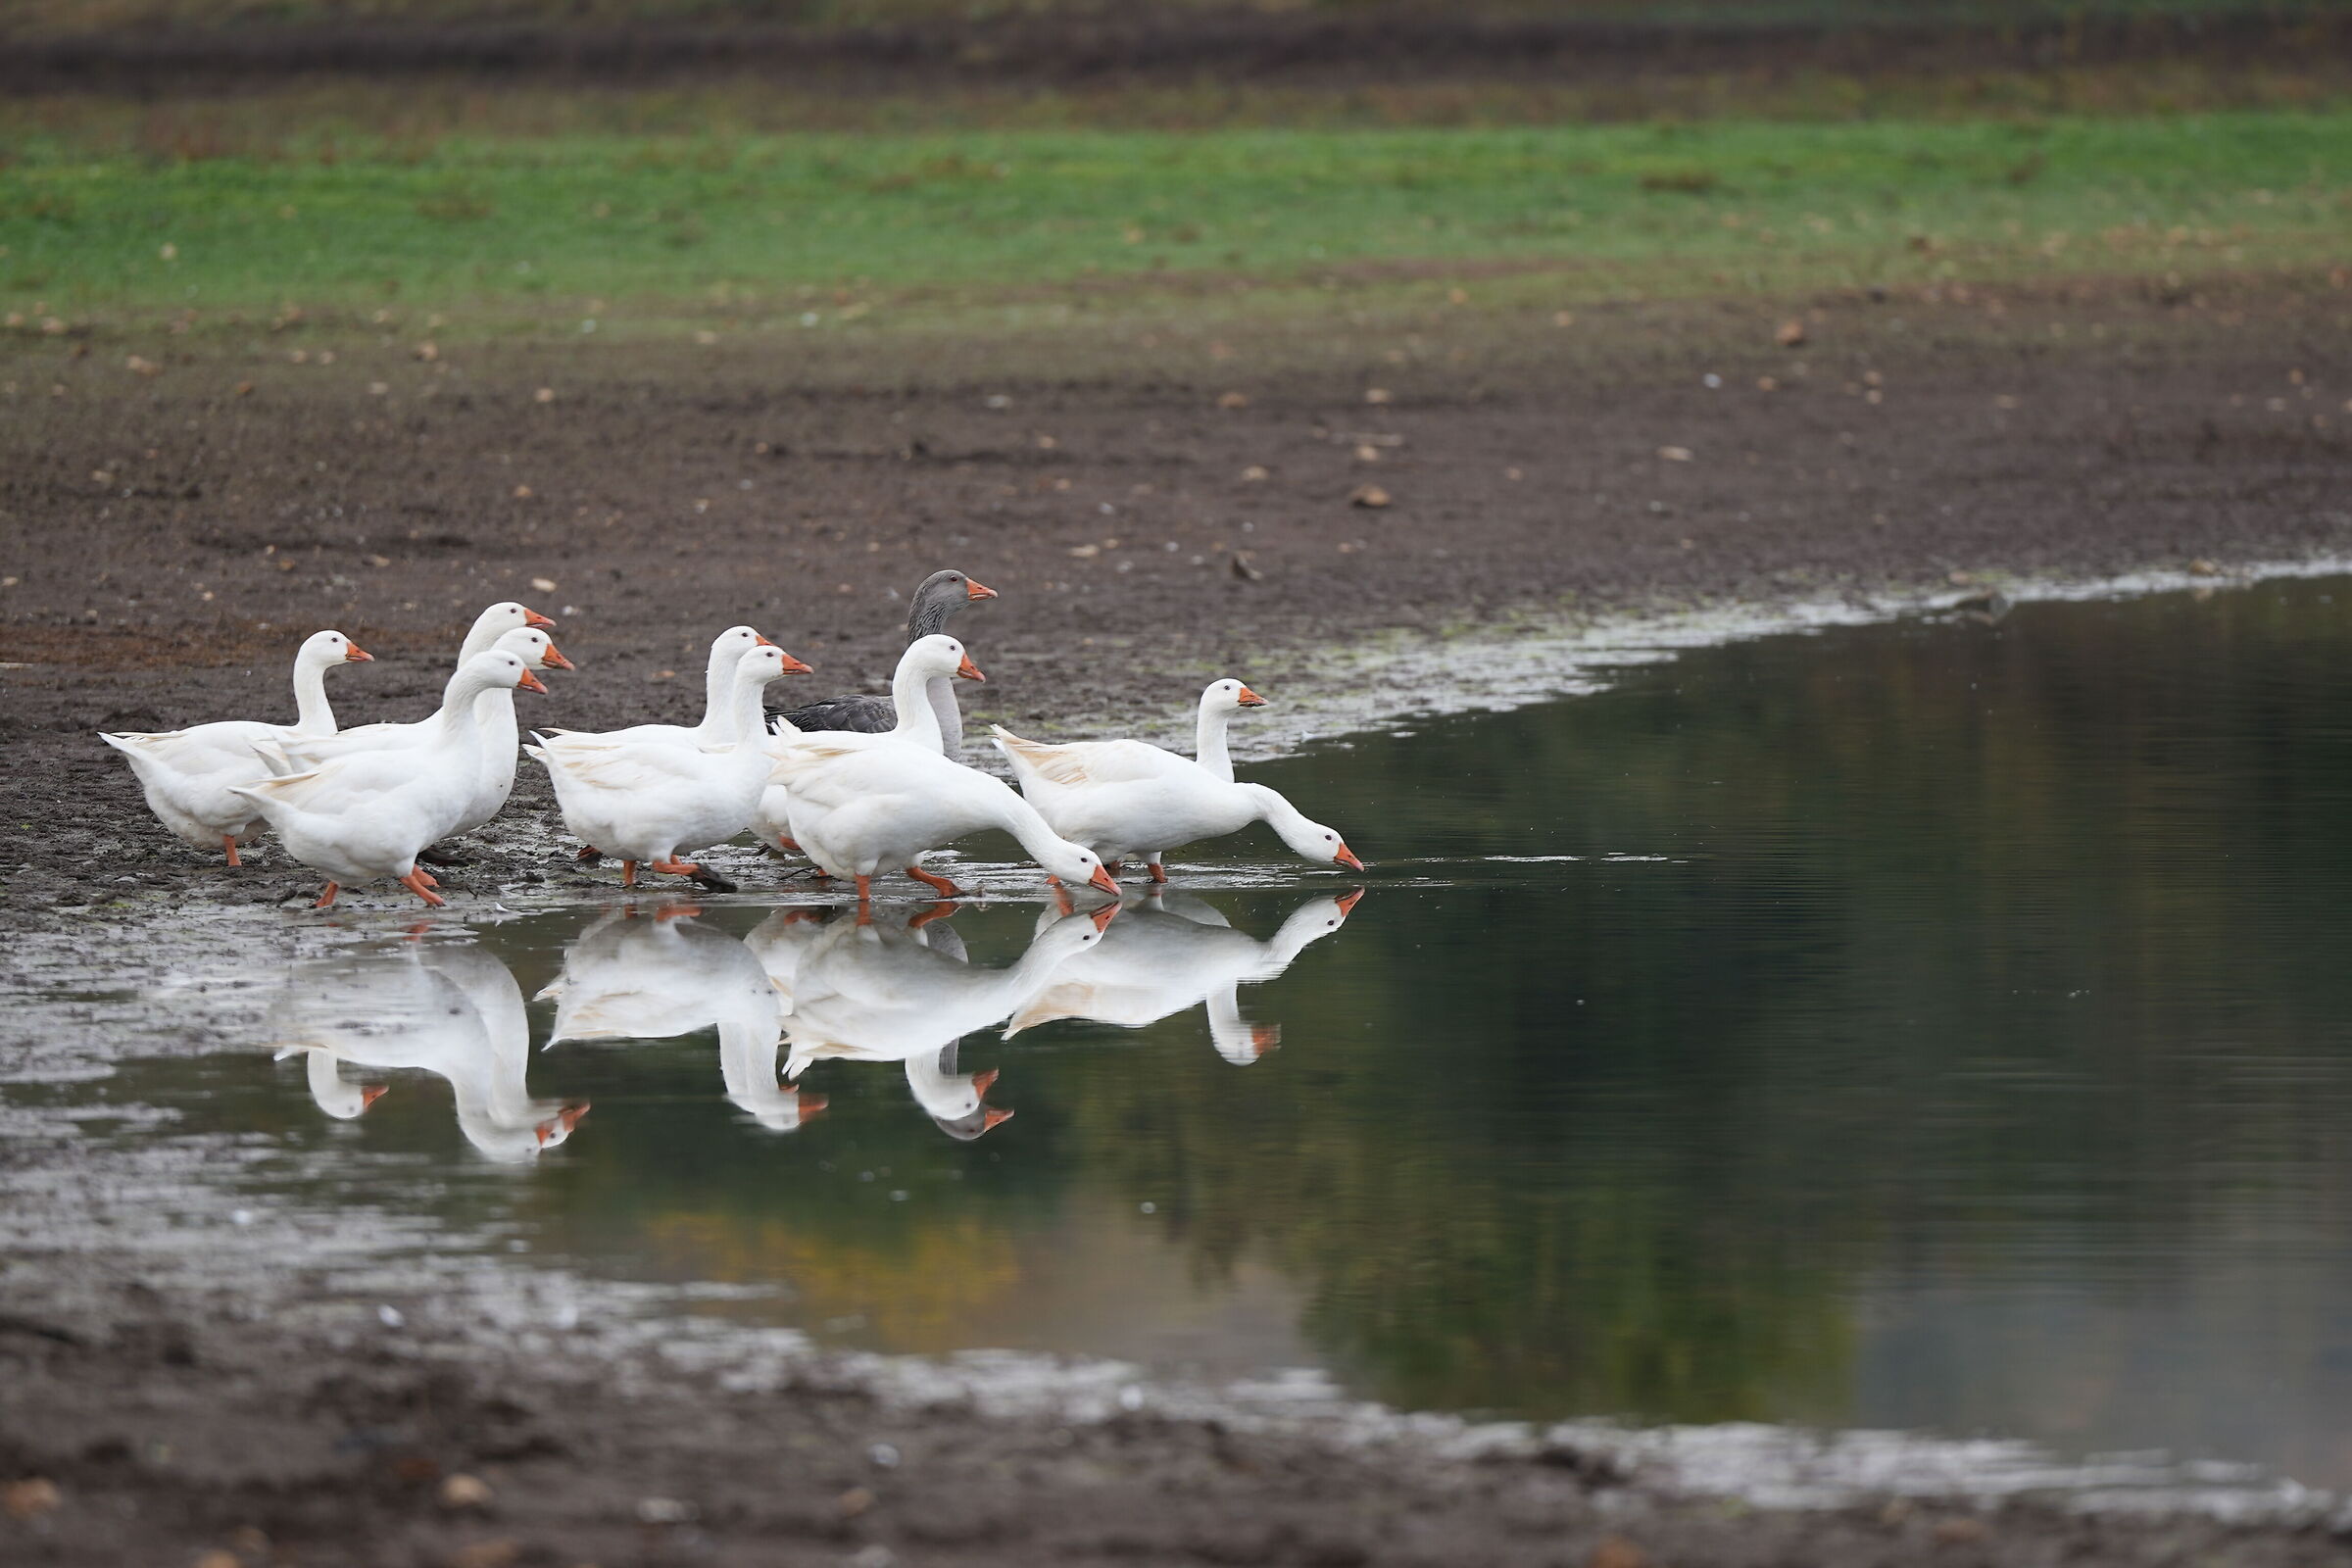 Geese&Reflection...